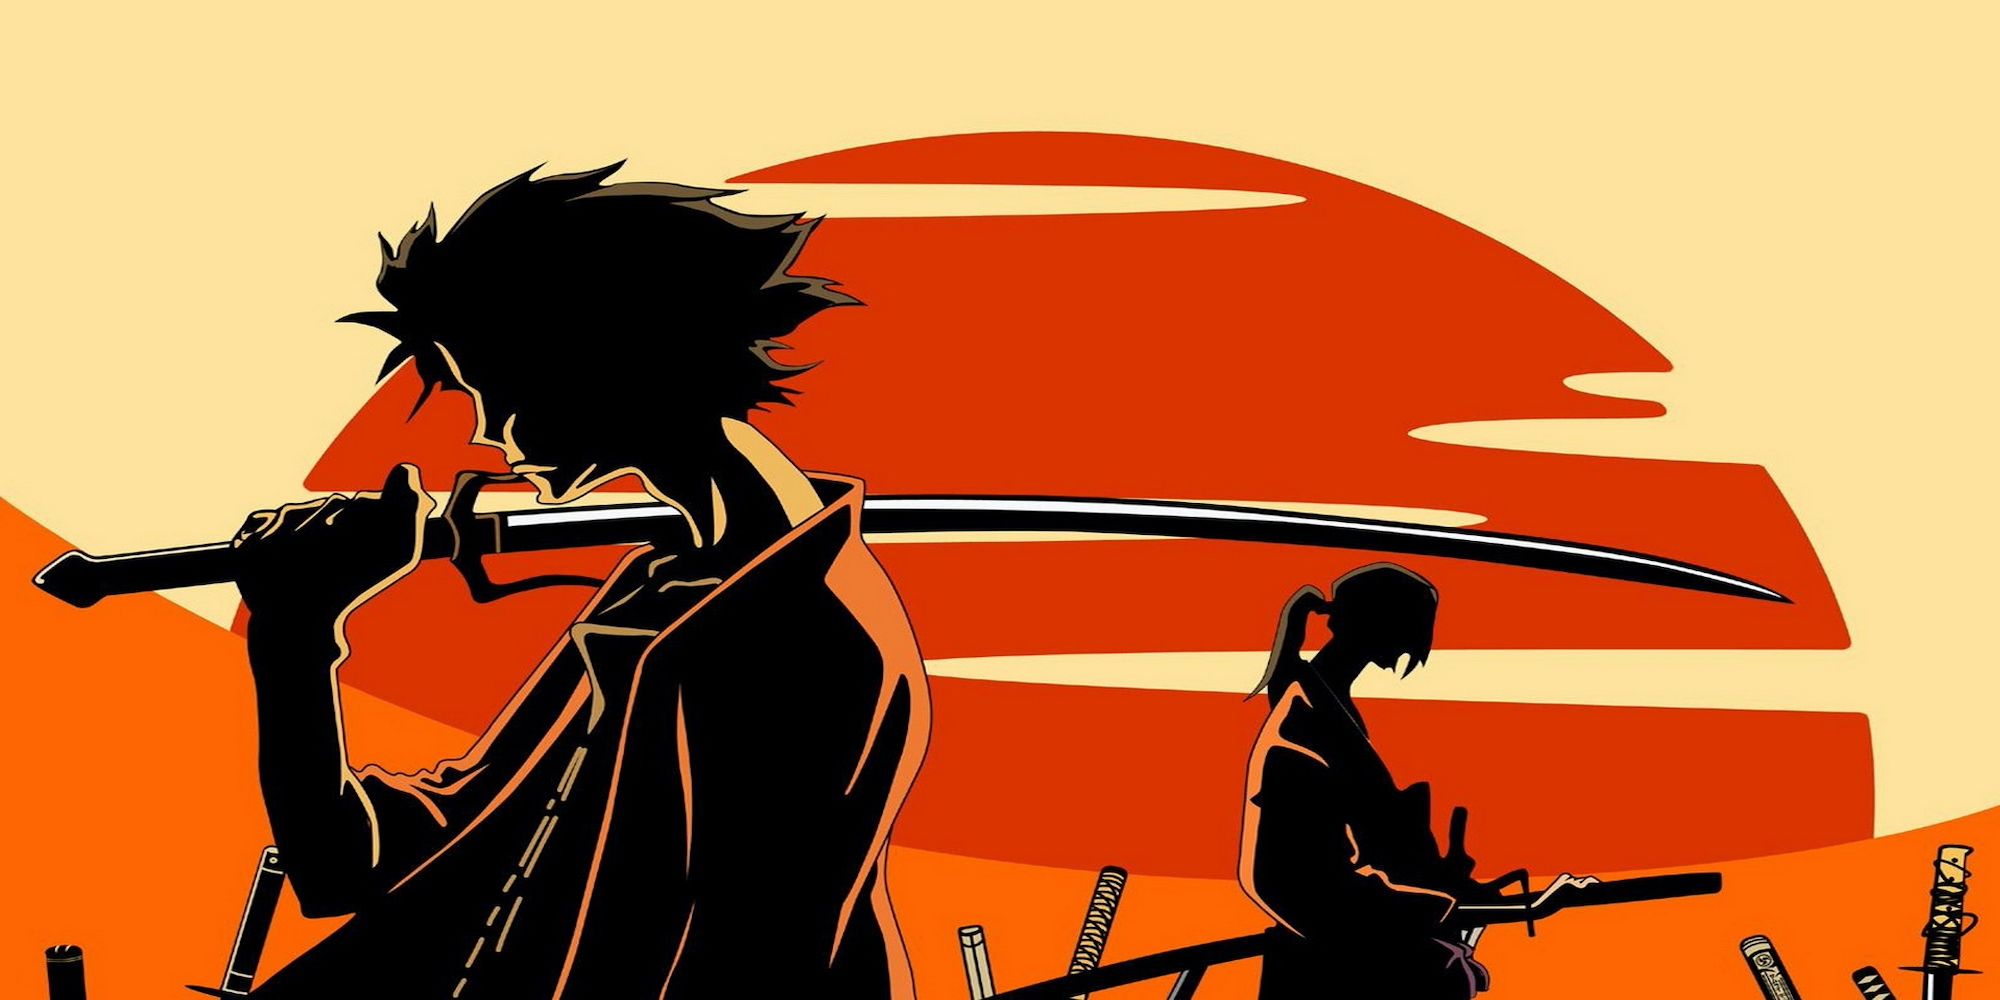 Silhouette of characters from Samurai Champloo (anime series)